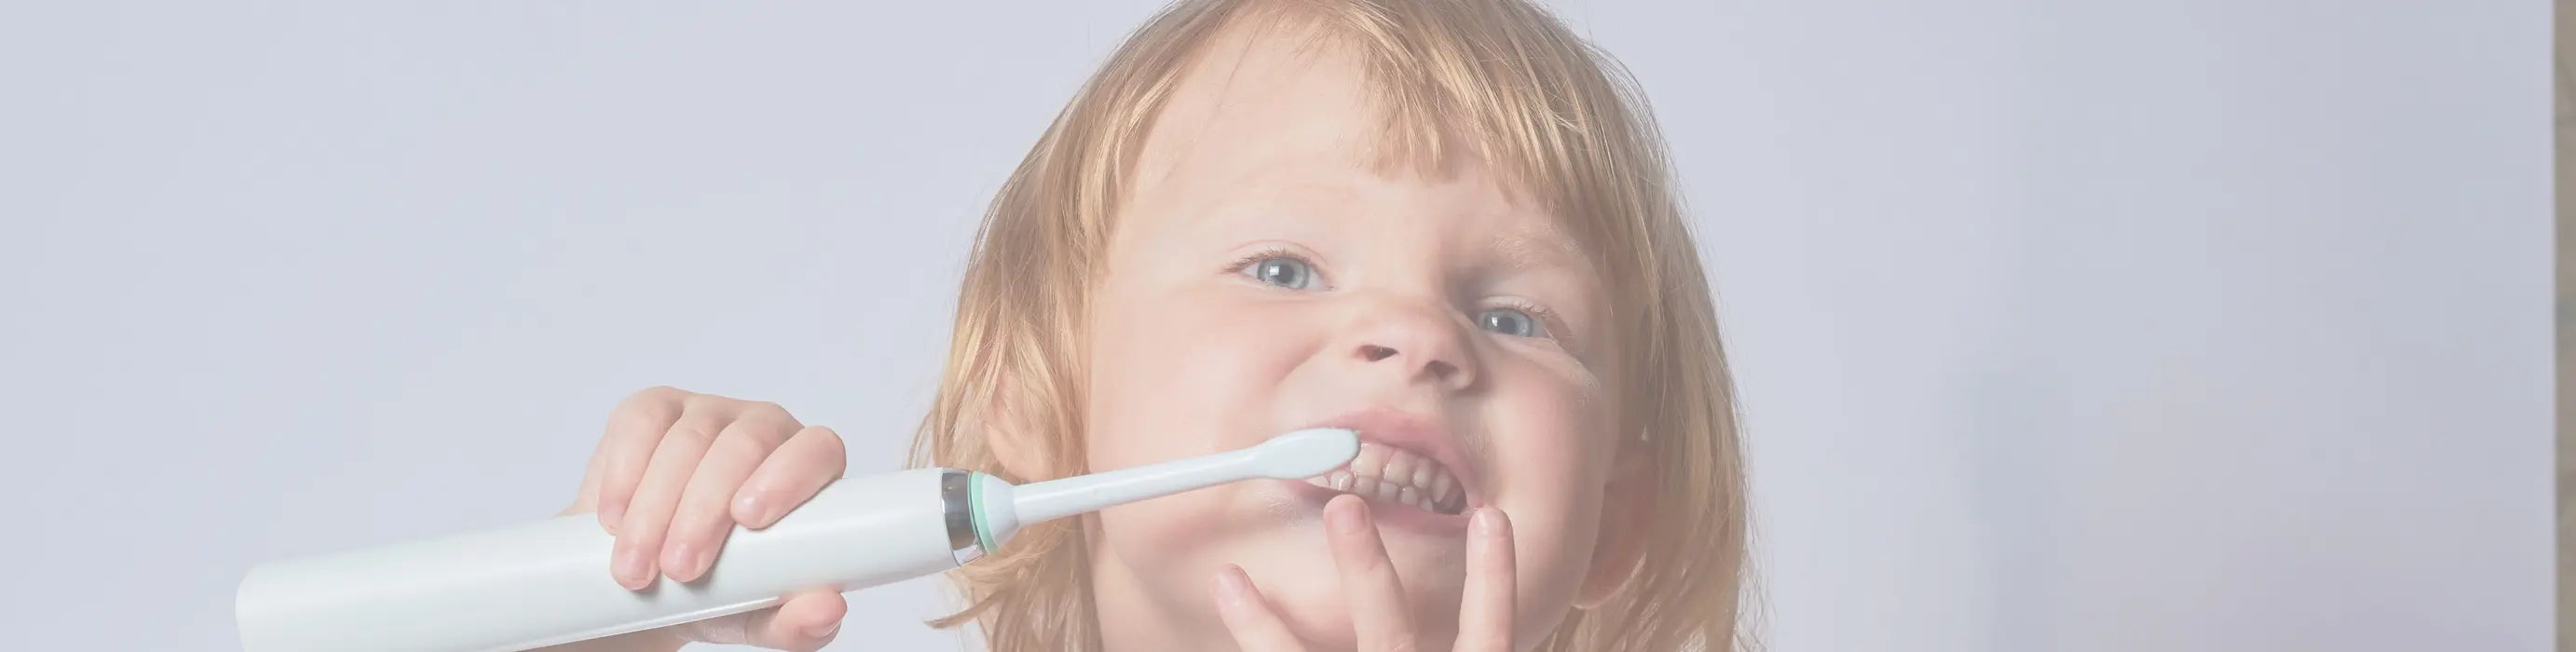 Toothbrush for babies